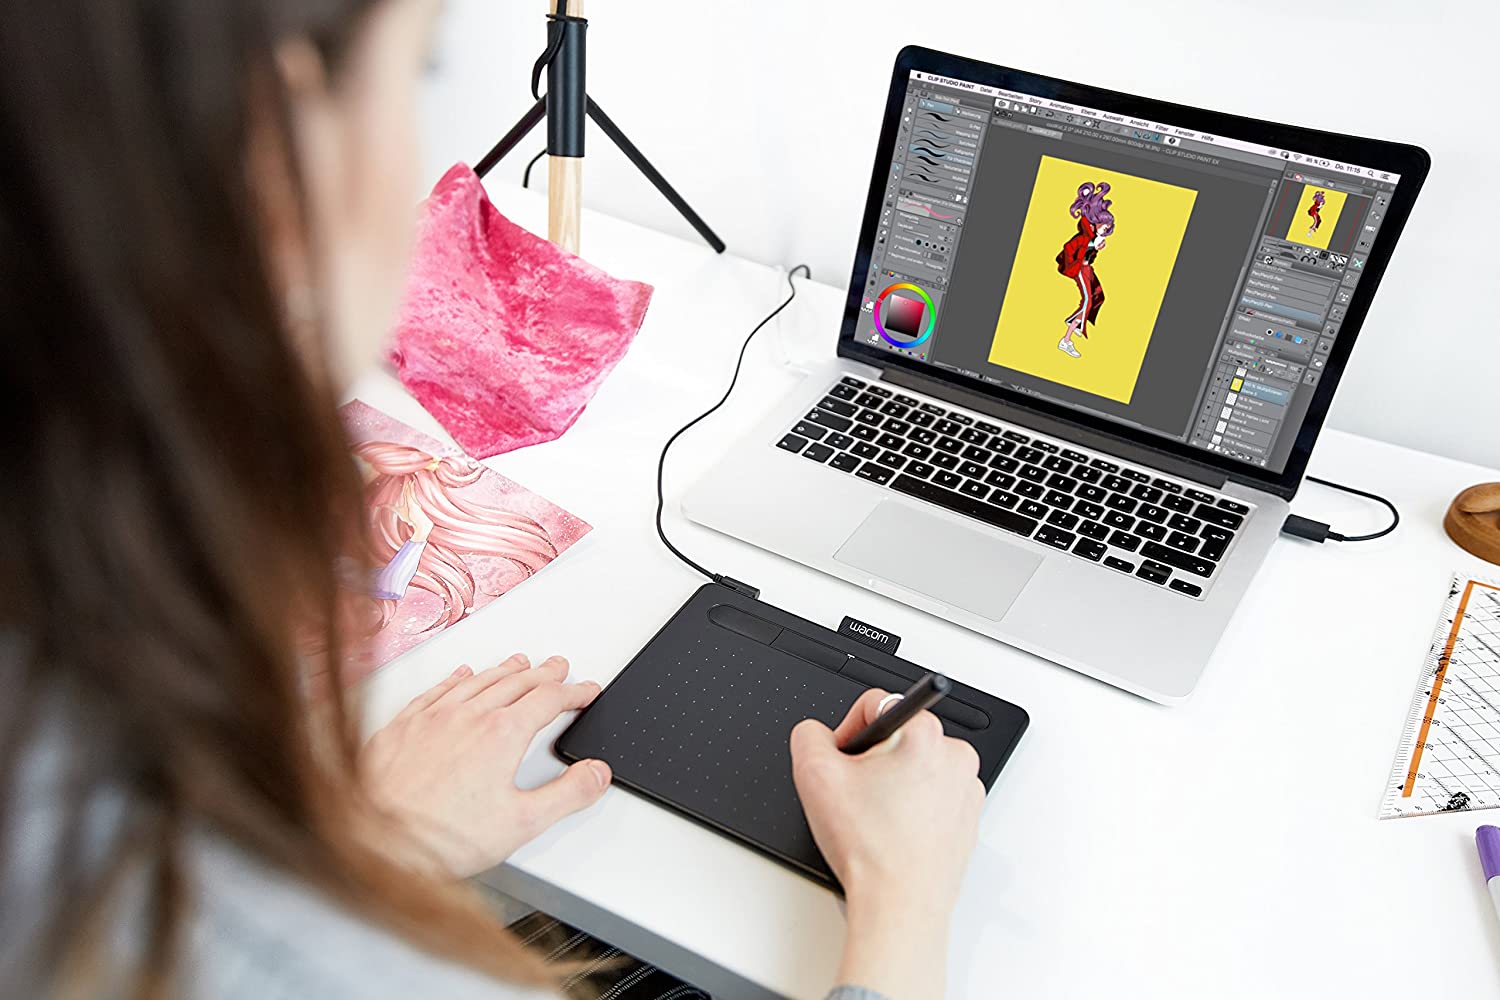 Wacom Intuos Graphics Drawing Tablet in use